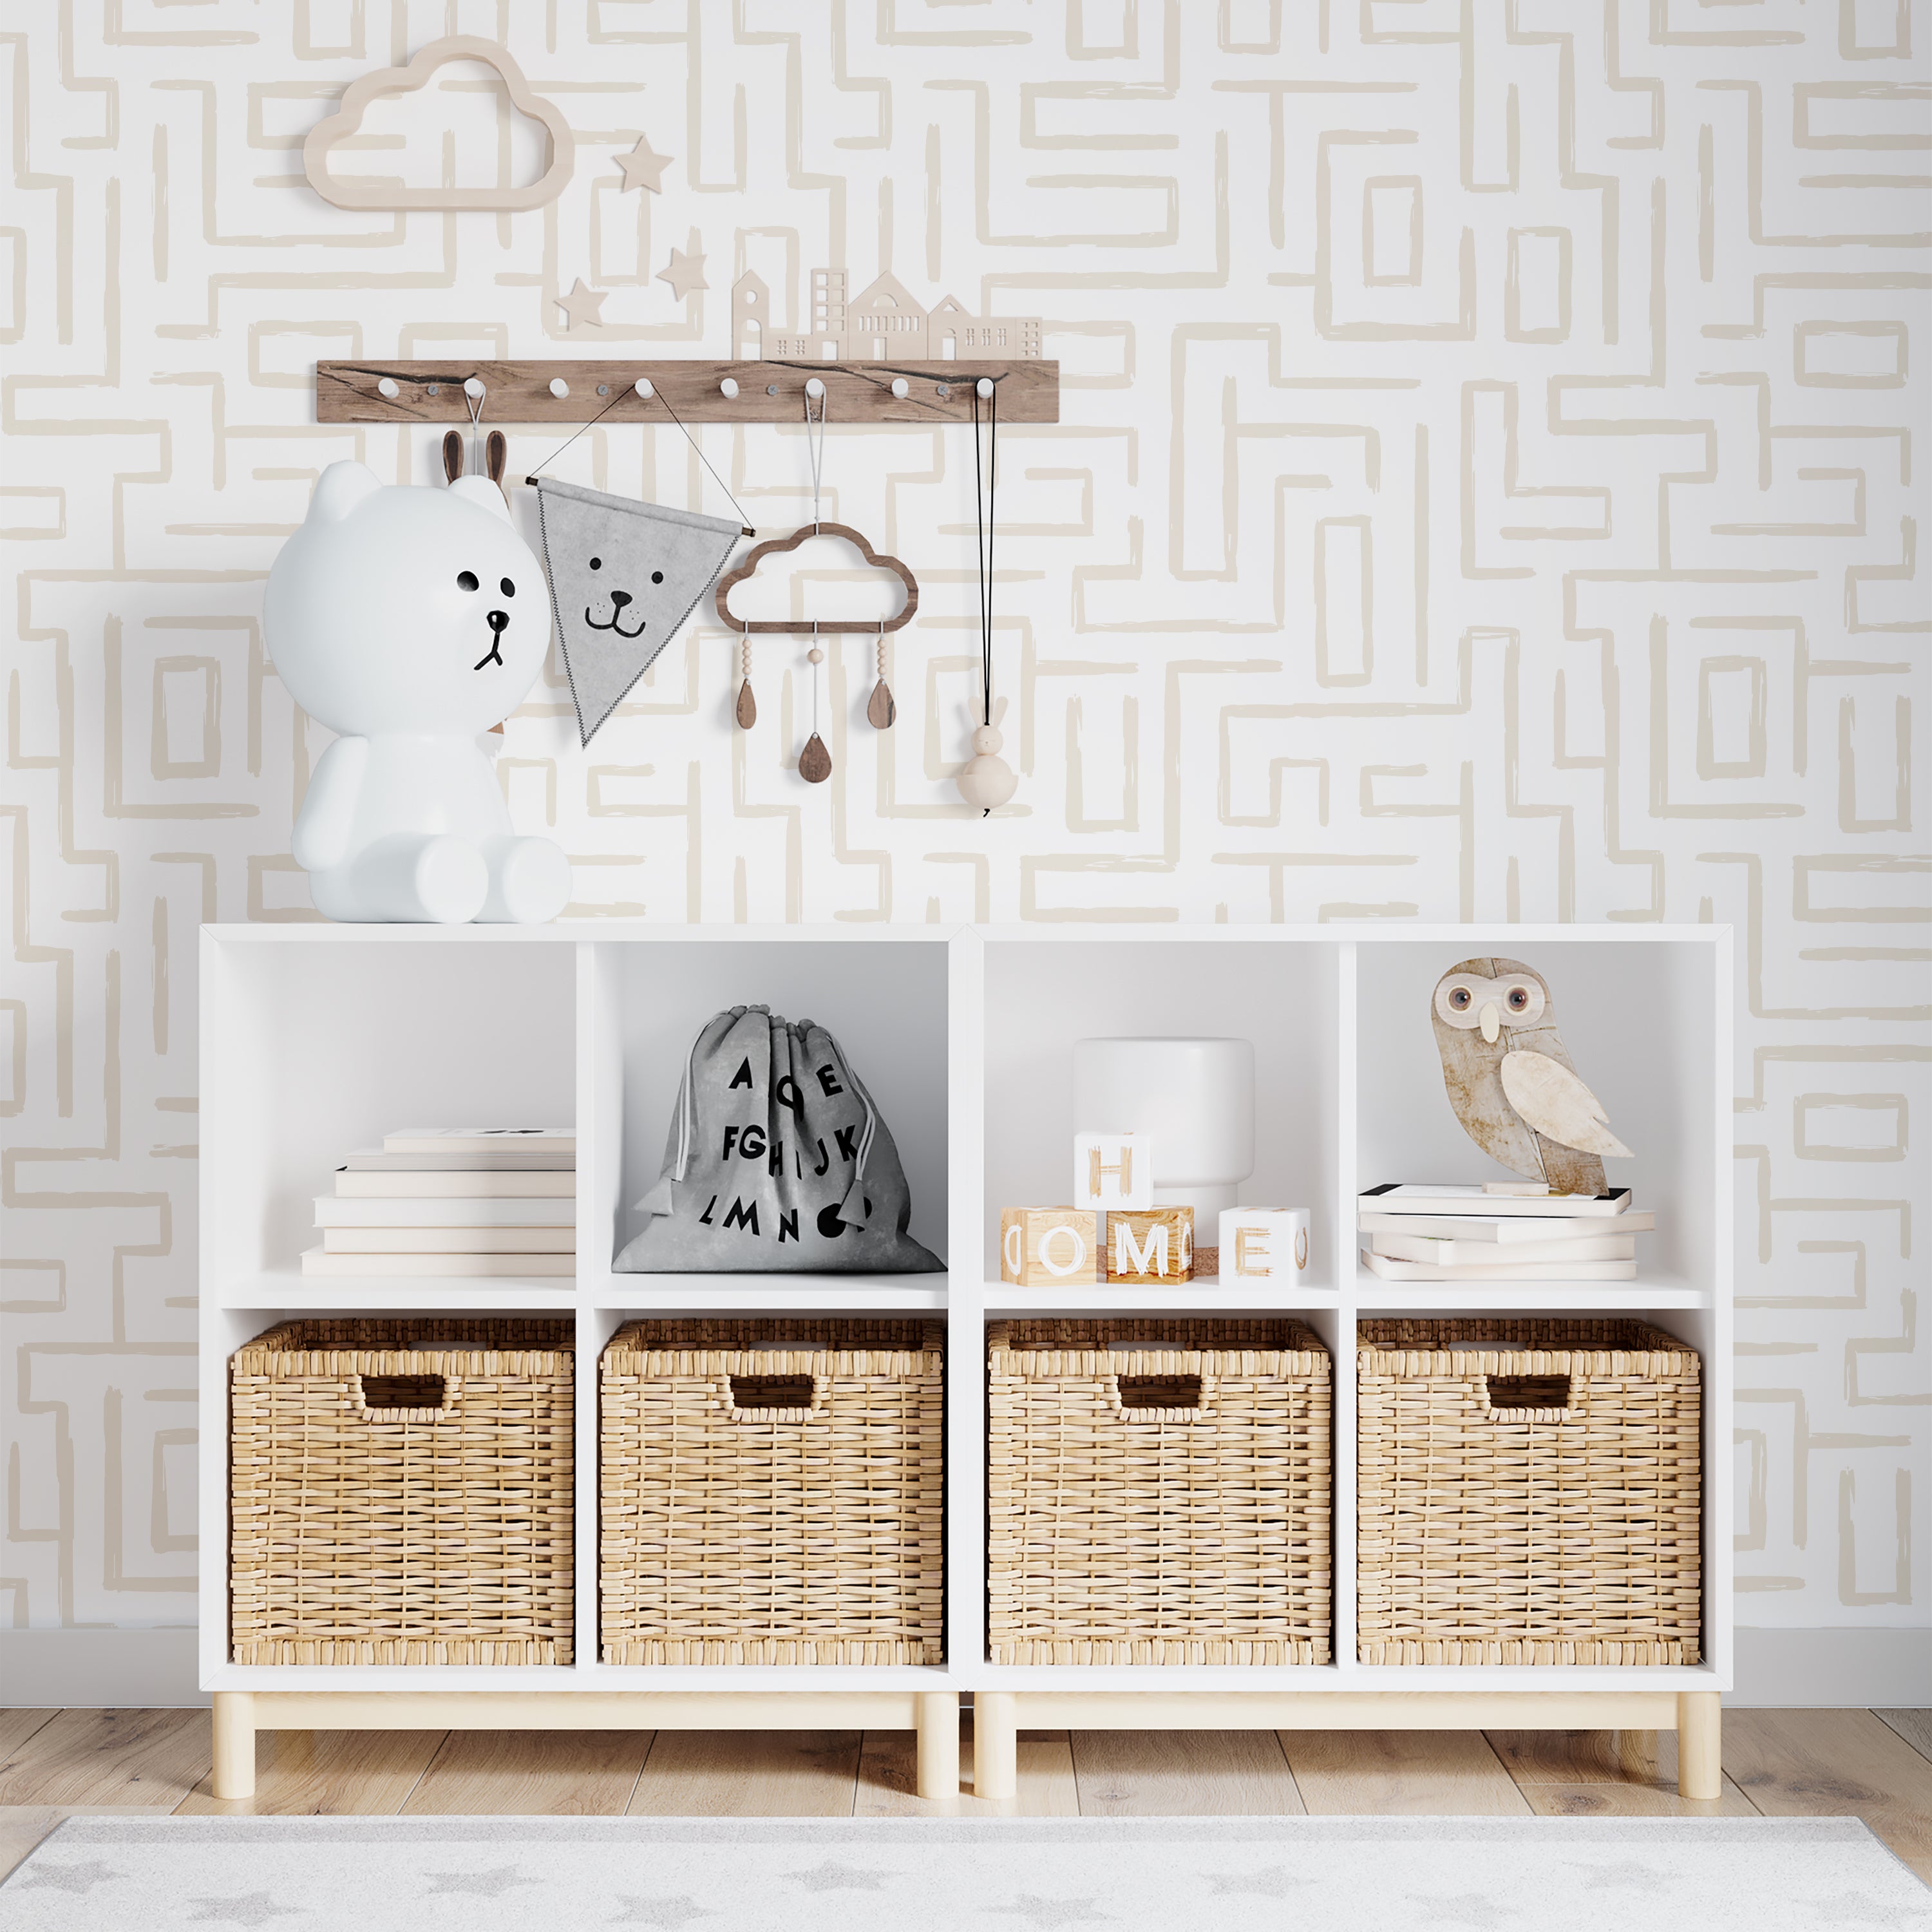 A stylish nursery room wall covered with Organic Wallpaper 19 Ecru, featuring an intricate maze pattern in a gentle ecru shade. The room is accessorized with a children's shelf displaying toys and decorative items, enhancing a playful yet sophisticated space.